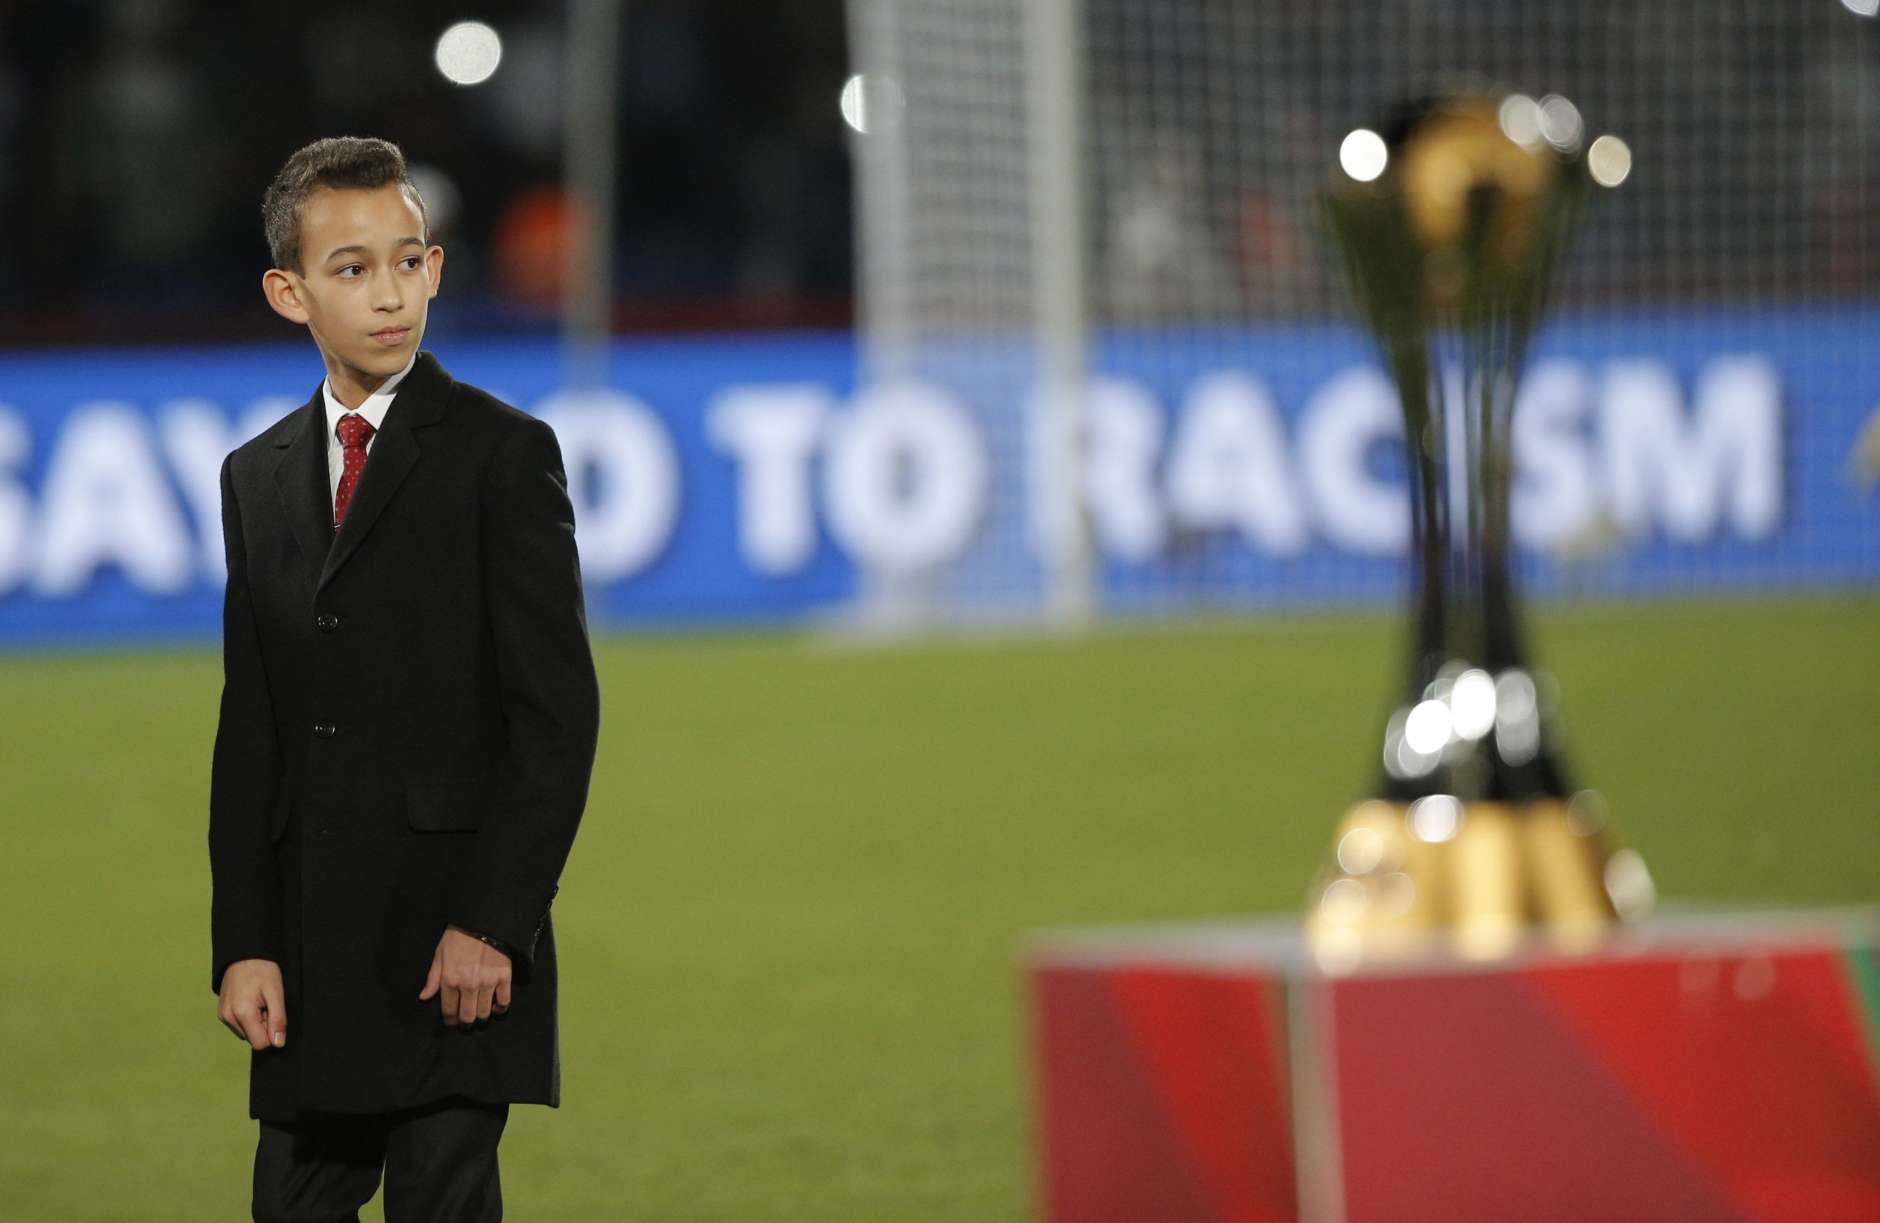 The son of Morocco's King Mohammed VI, Moulay Hassan, stands next to the trophy ahead of the final soccer match between Real Madrid and San Lorenzo at the Club World Cup soccer tournament in Marrakech, Morocco, Saturday, Dec. 20, 2014. (AP Photo/Christophe Ena)